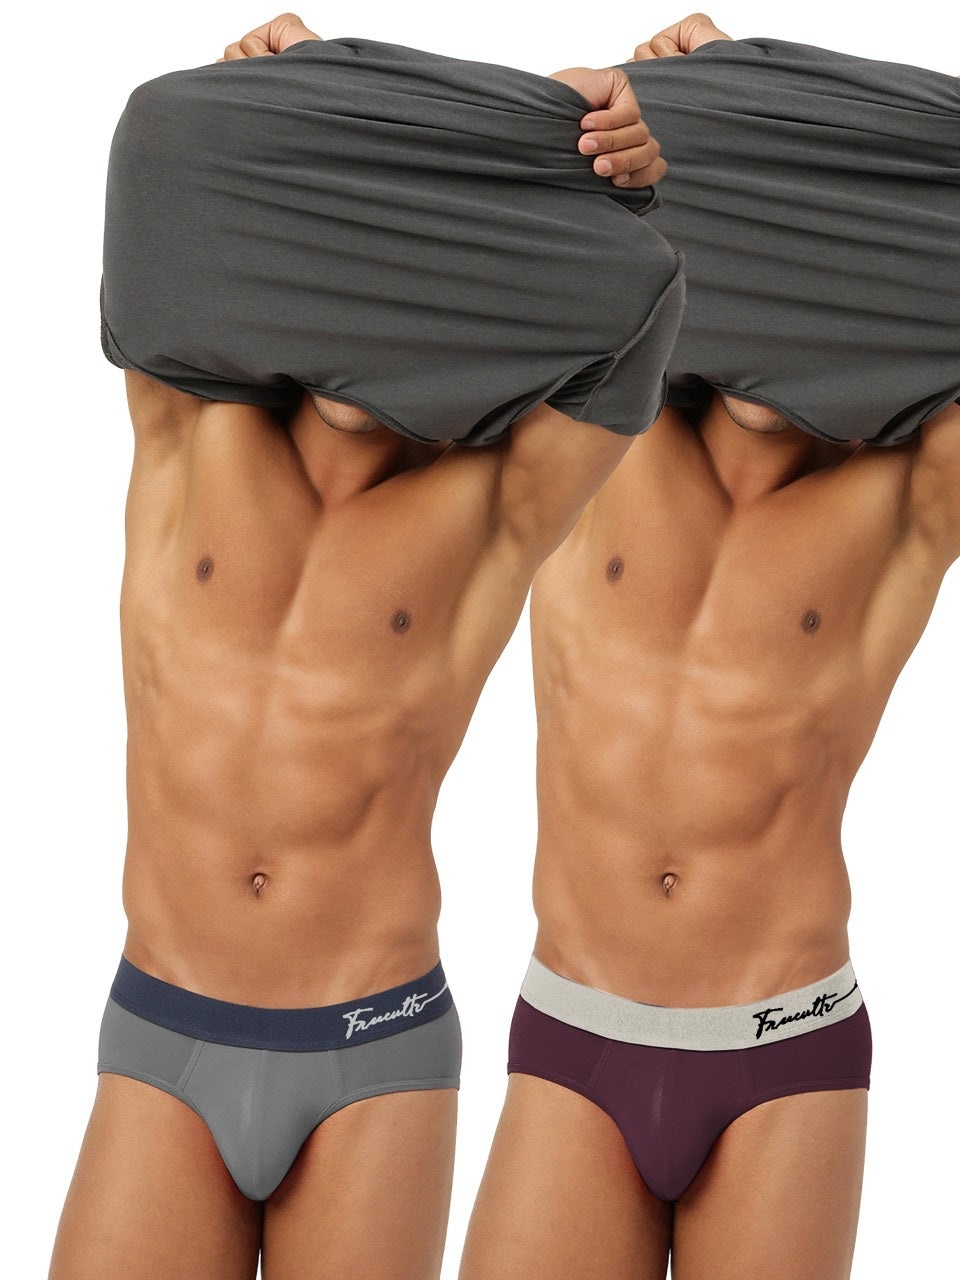 Men's Anti-Bacterial Micro Modal Brief in Cult Waistband (Pack of 2)